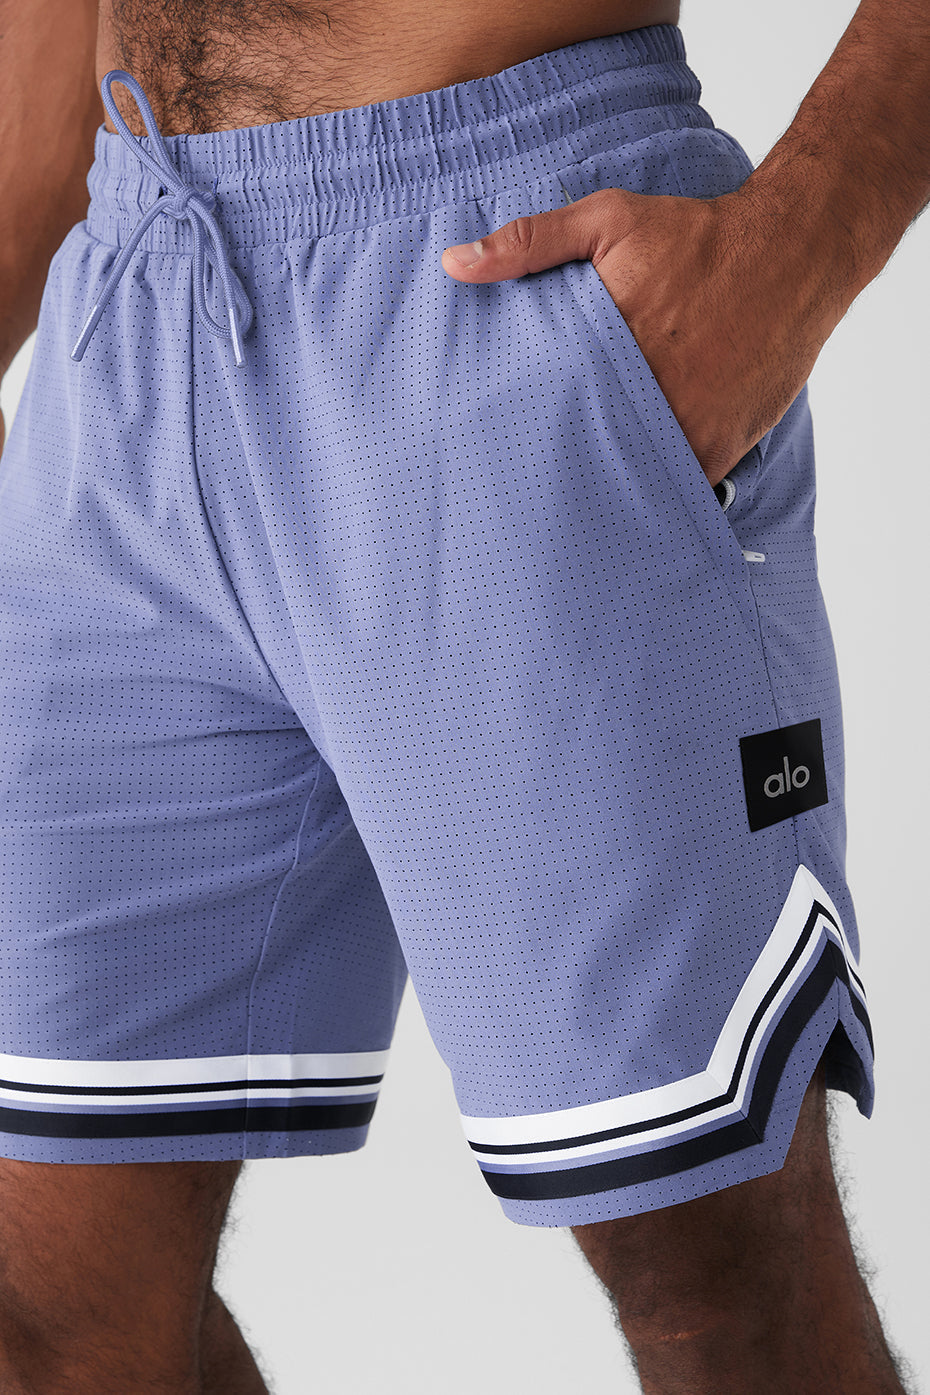 9' Traction Arena Short - Infinity Blue